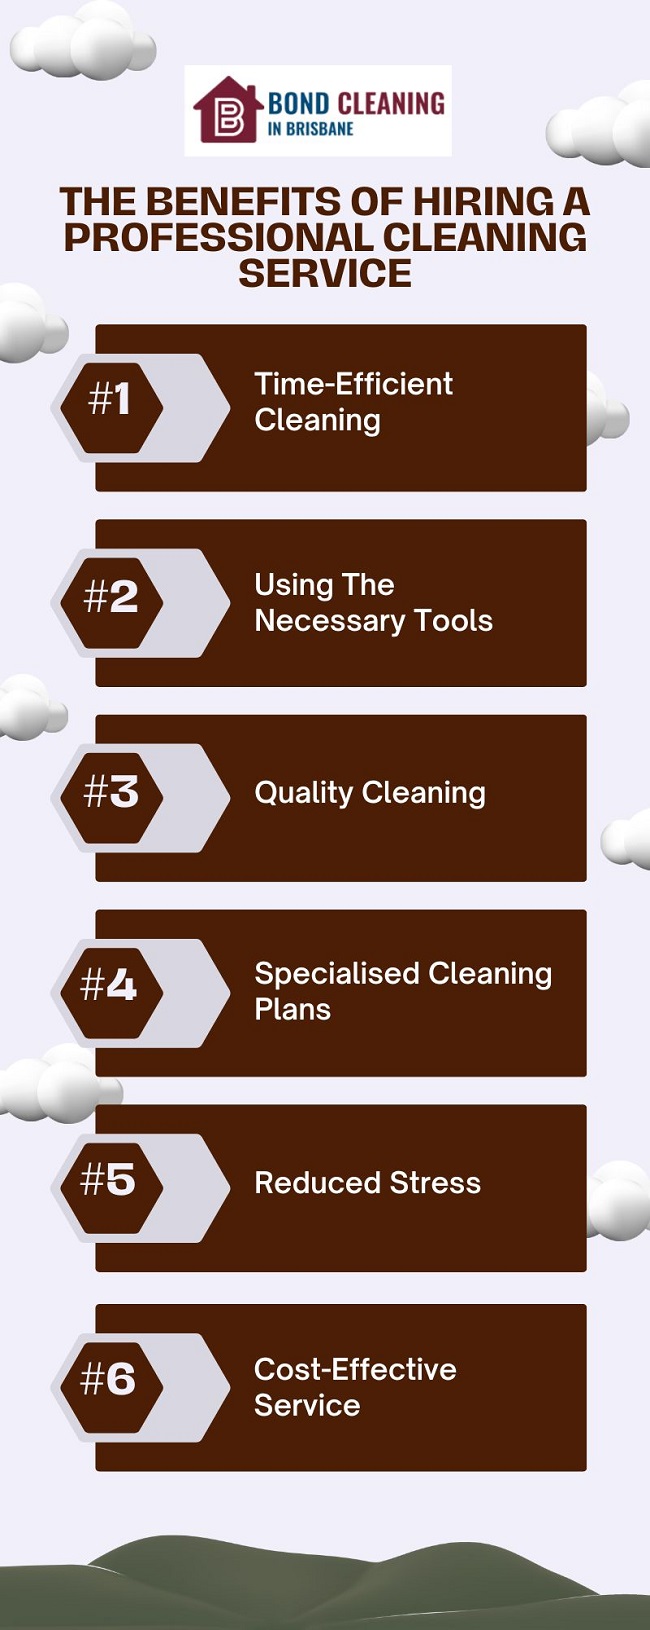 Info on Benefits of Hiring a Professional Cleaning Service